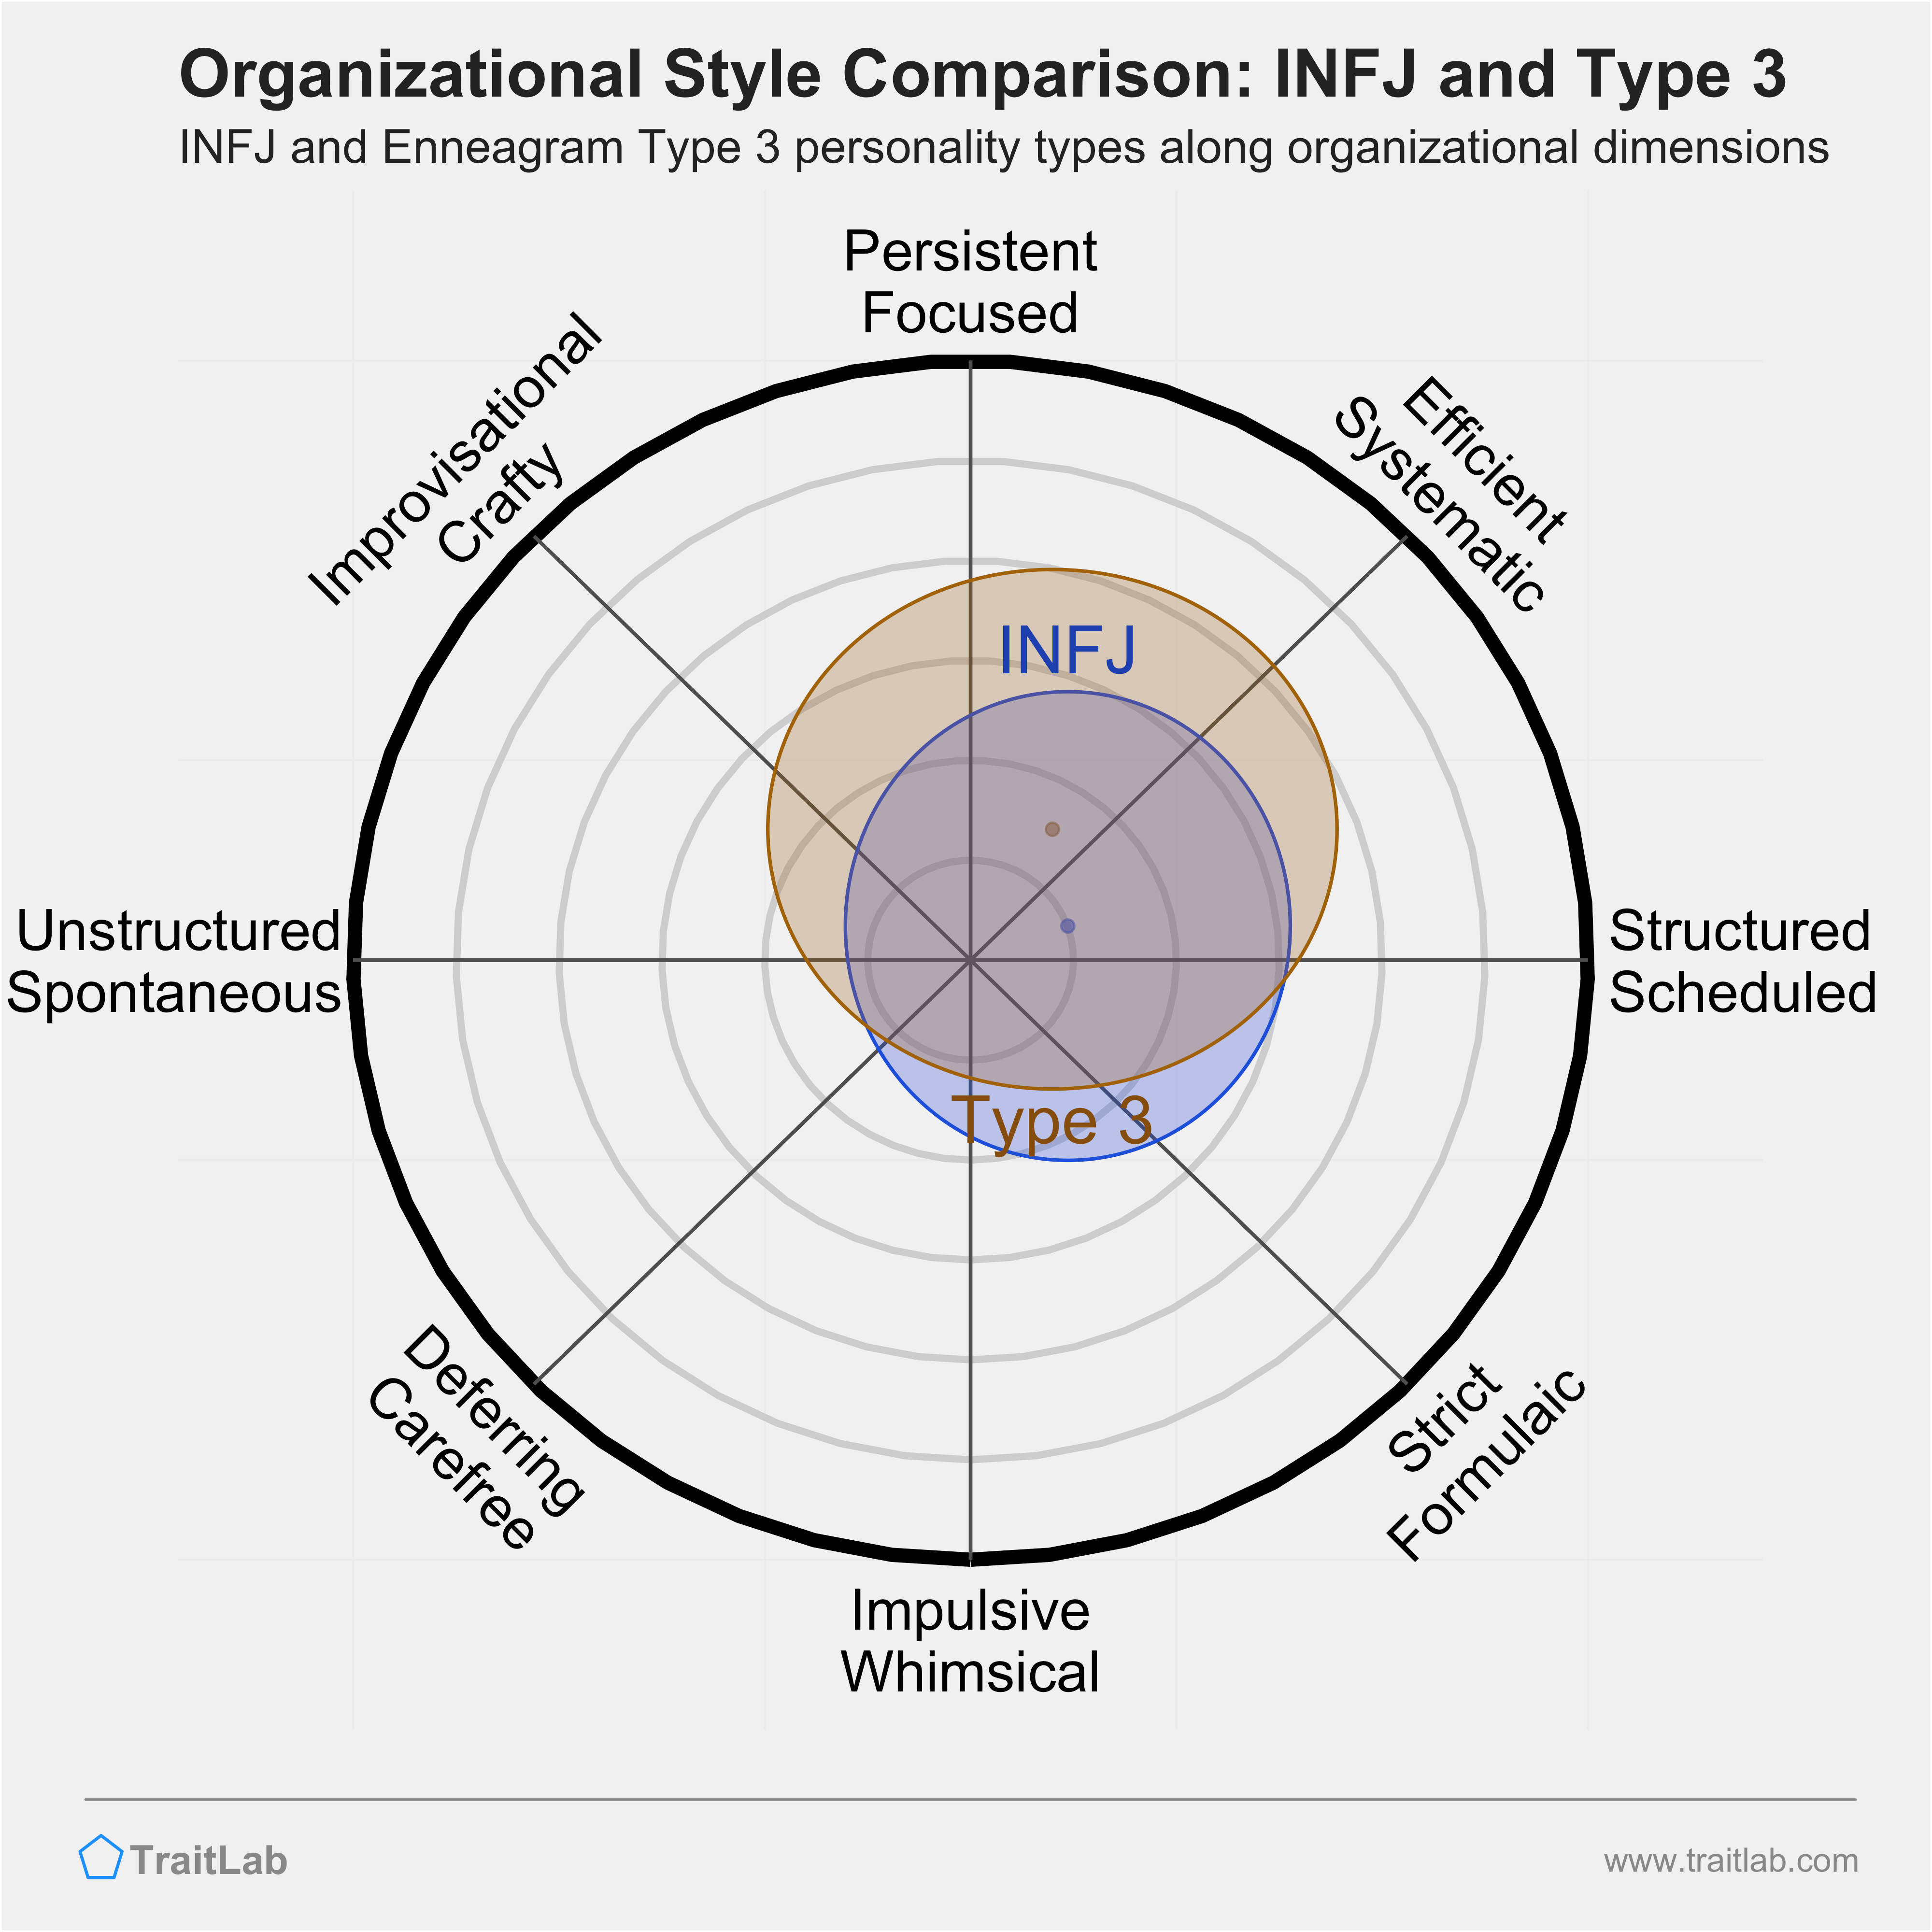 INFJ and Type 3 comparison across organizational dimensions